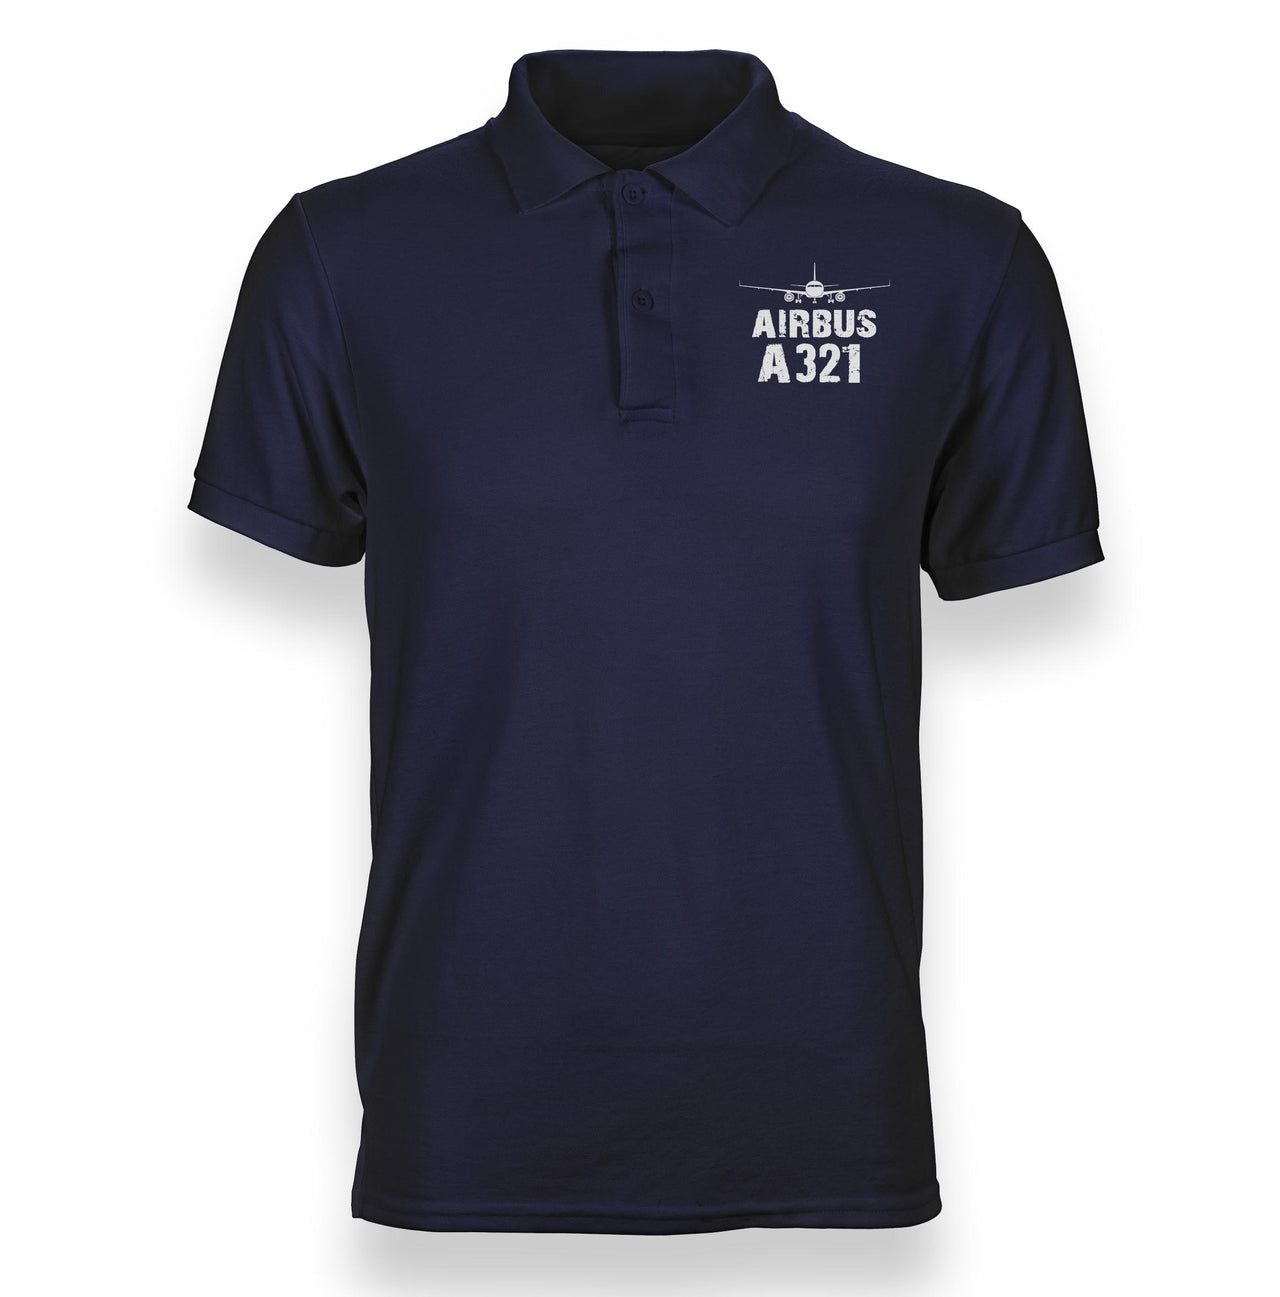 Airbus A321 & Plane Designed Polo T-Shirts